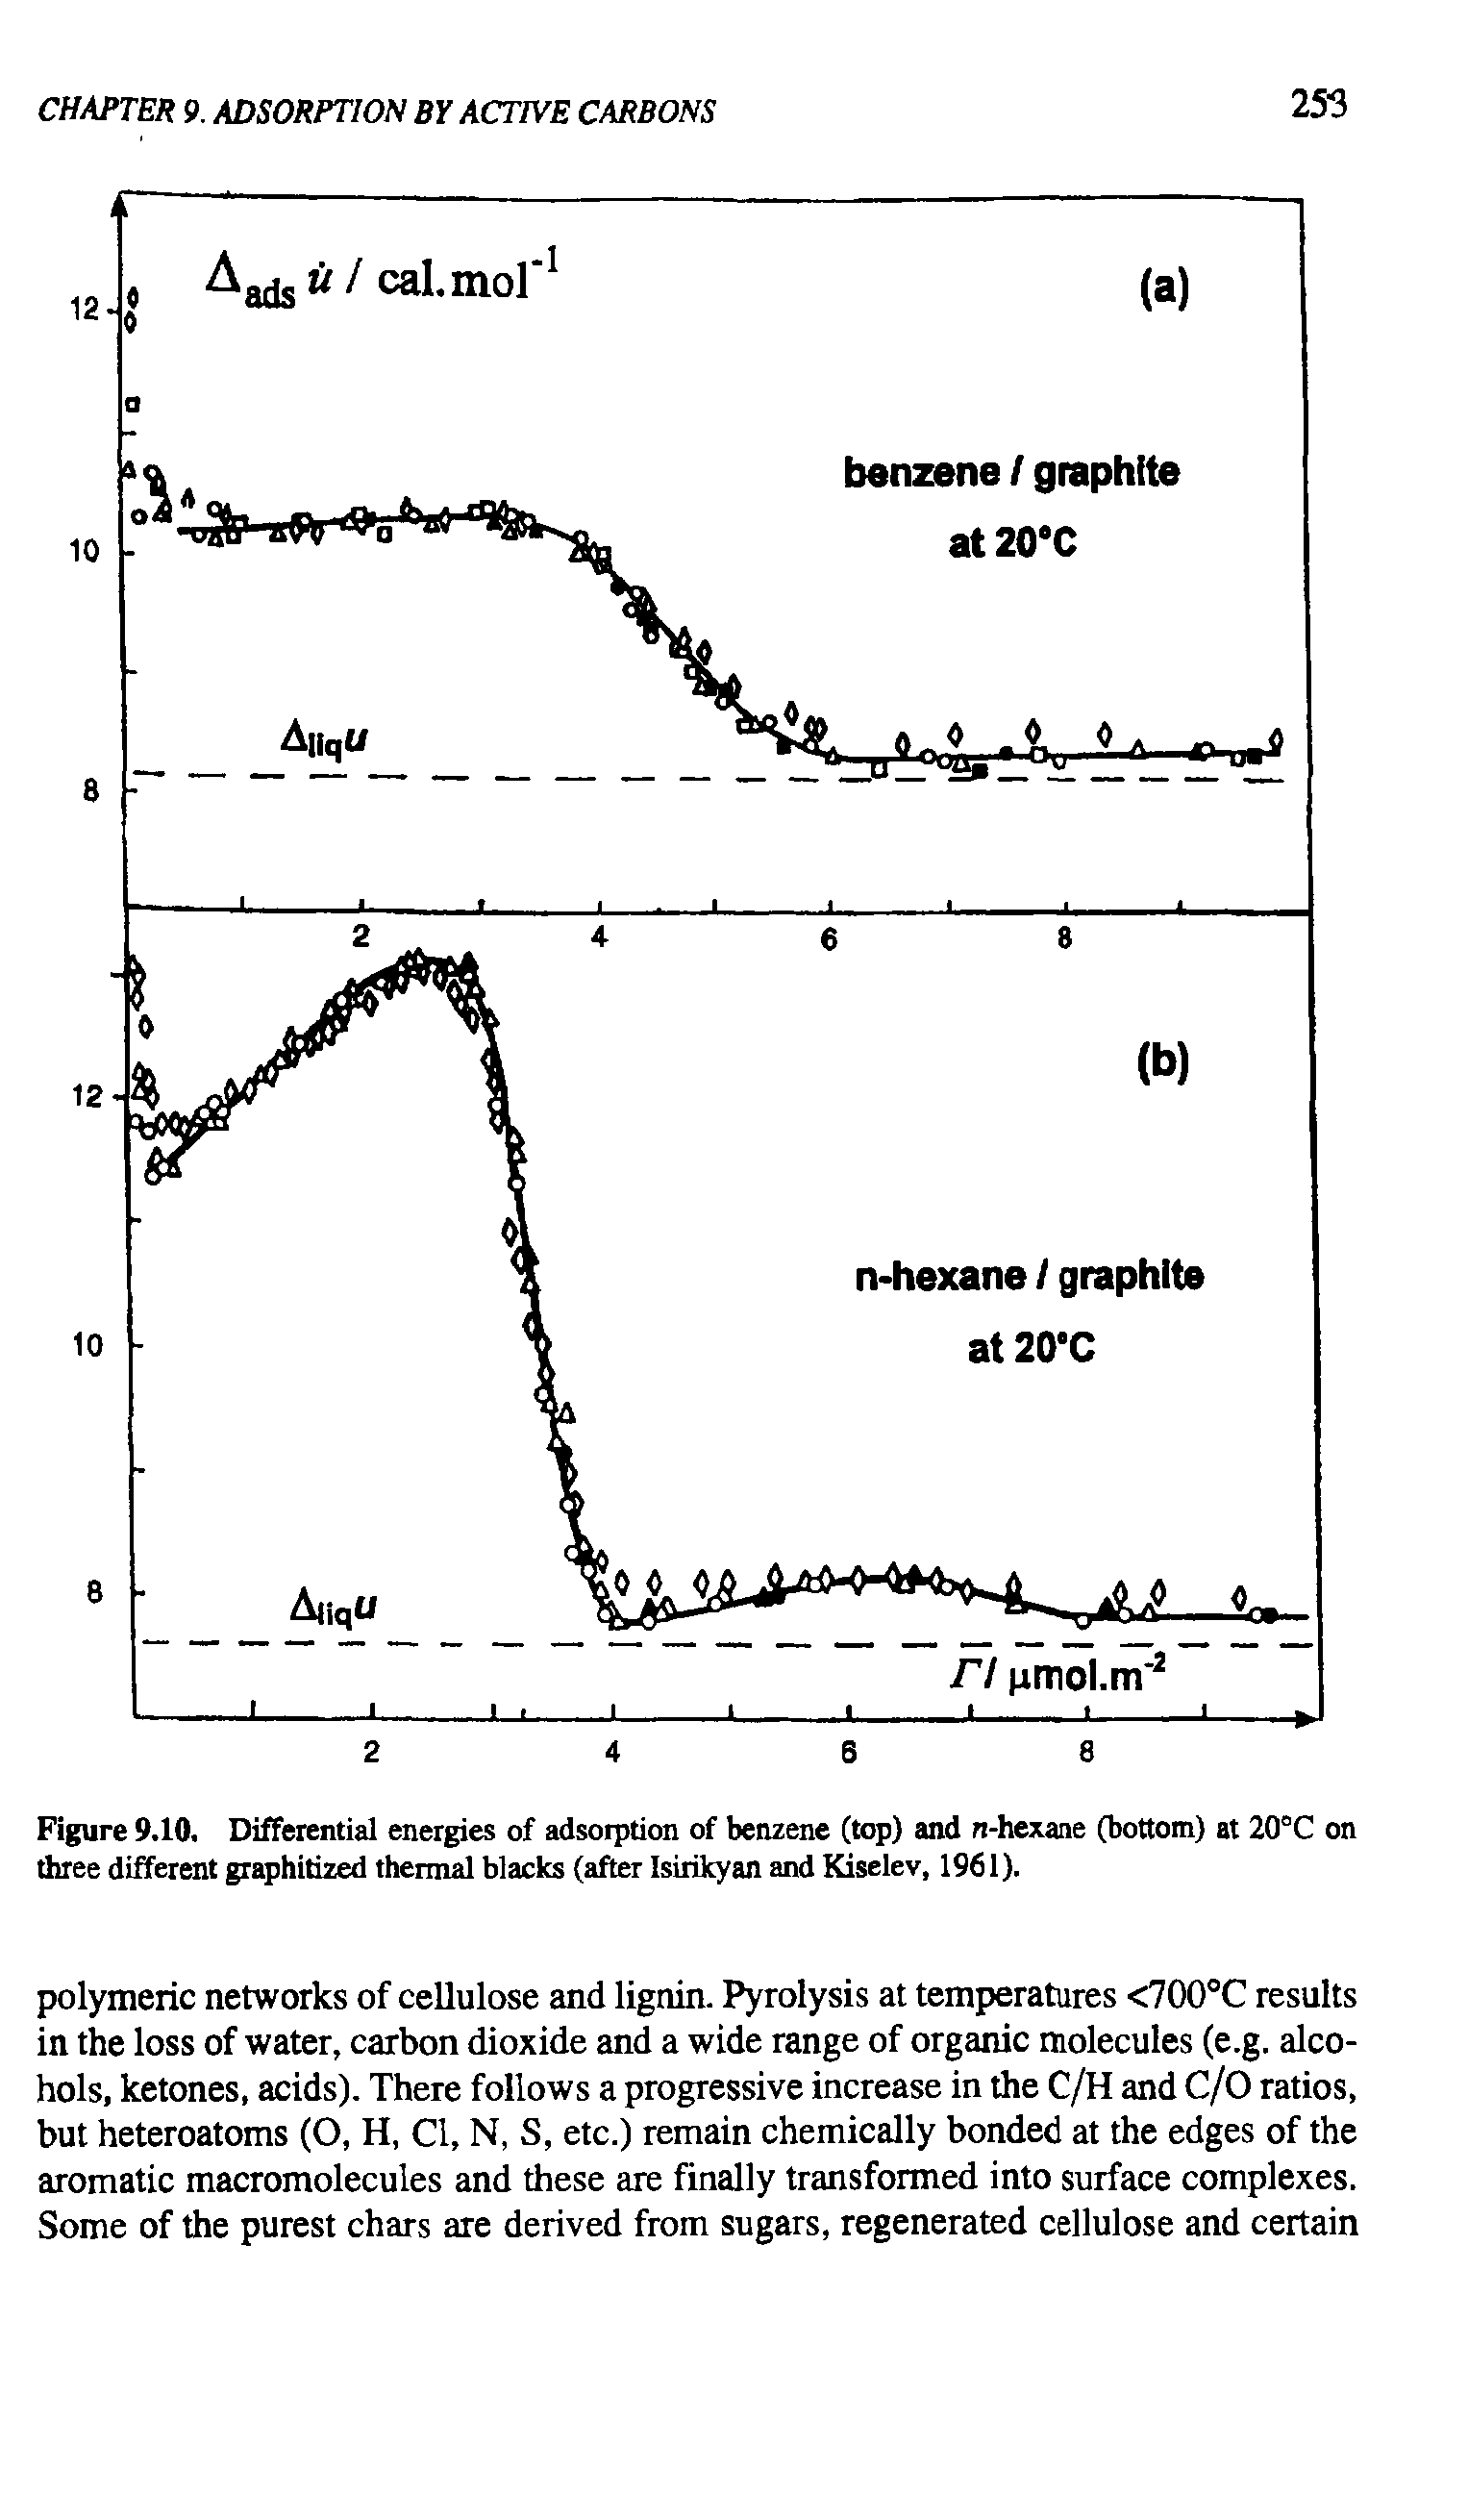 Figure 9.10. Differential energies of adsoiption of benzene (top) and n-hexane (bottom) at 20°C on three different graphitized thermal blacks (after Isirikyan and Kiselev, 1961).